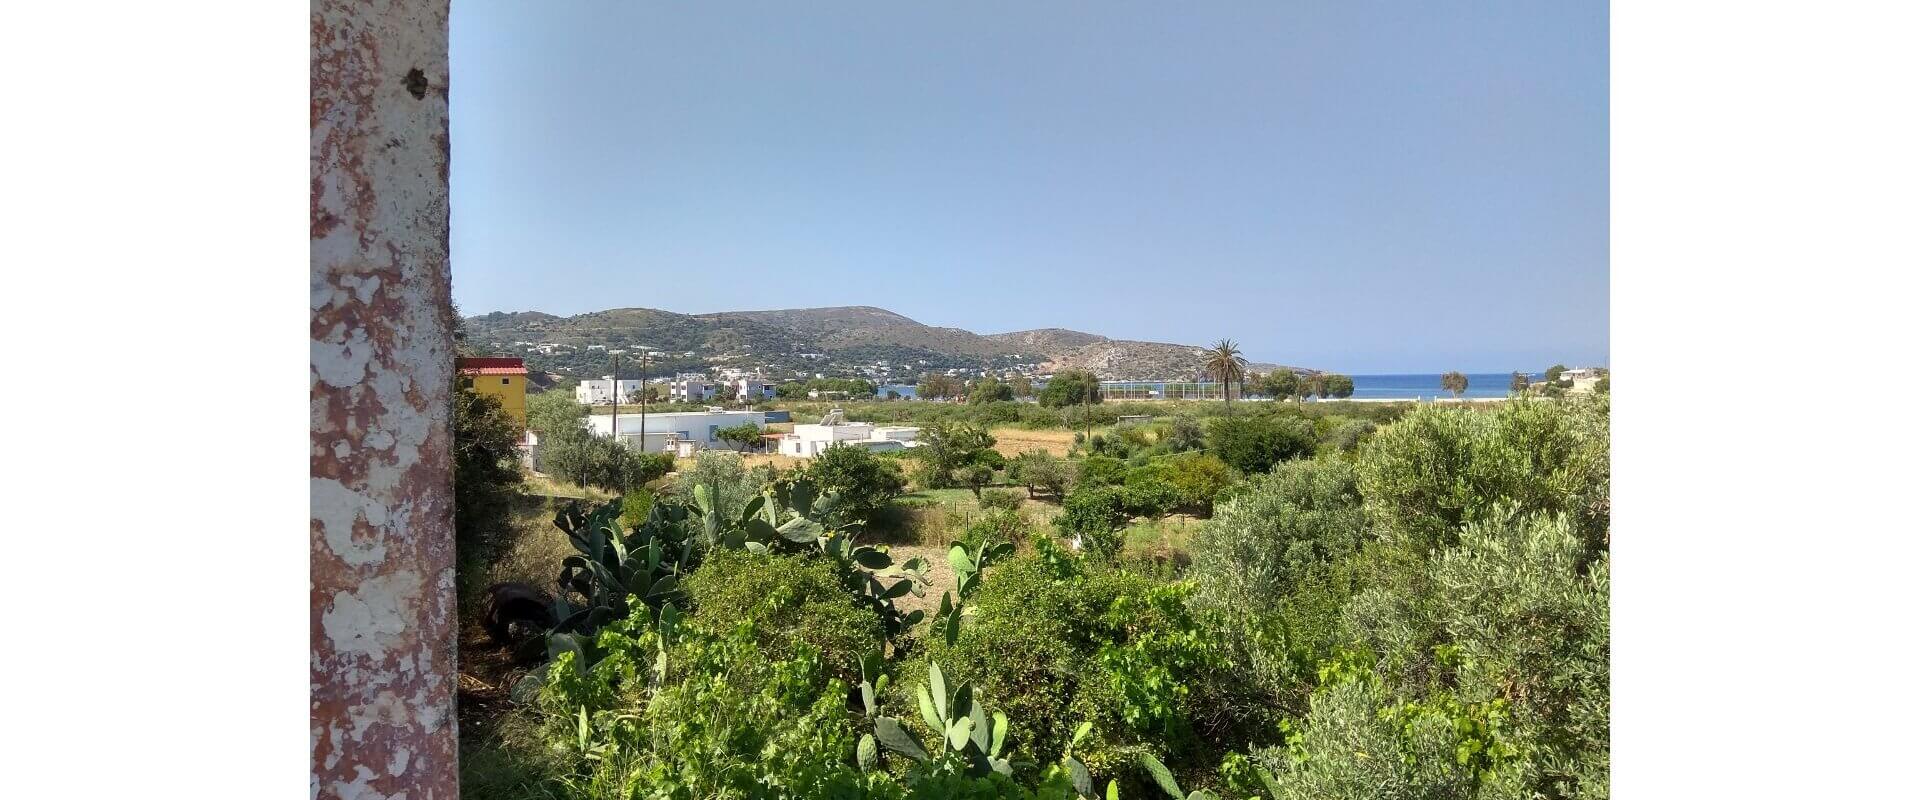 Plot for sale Gourna L 755